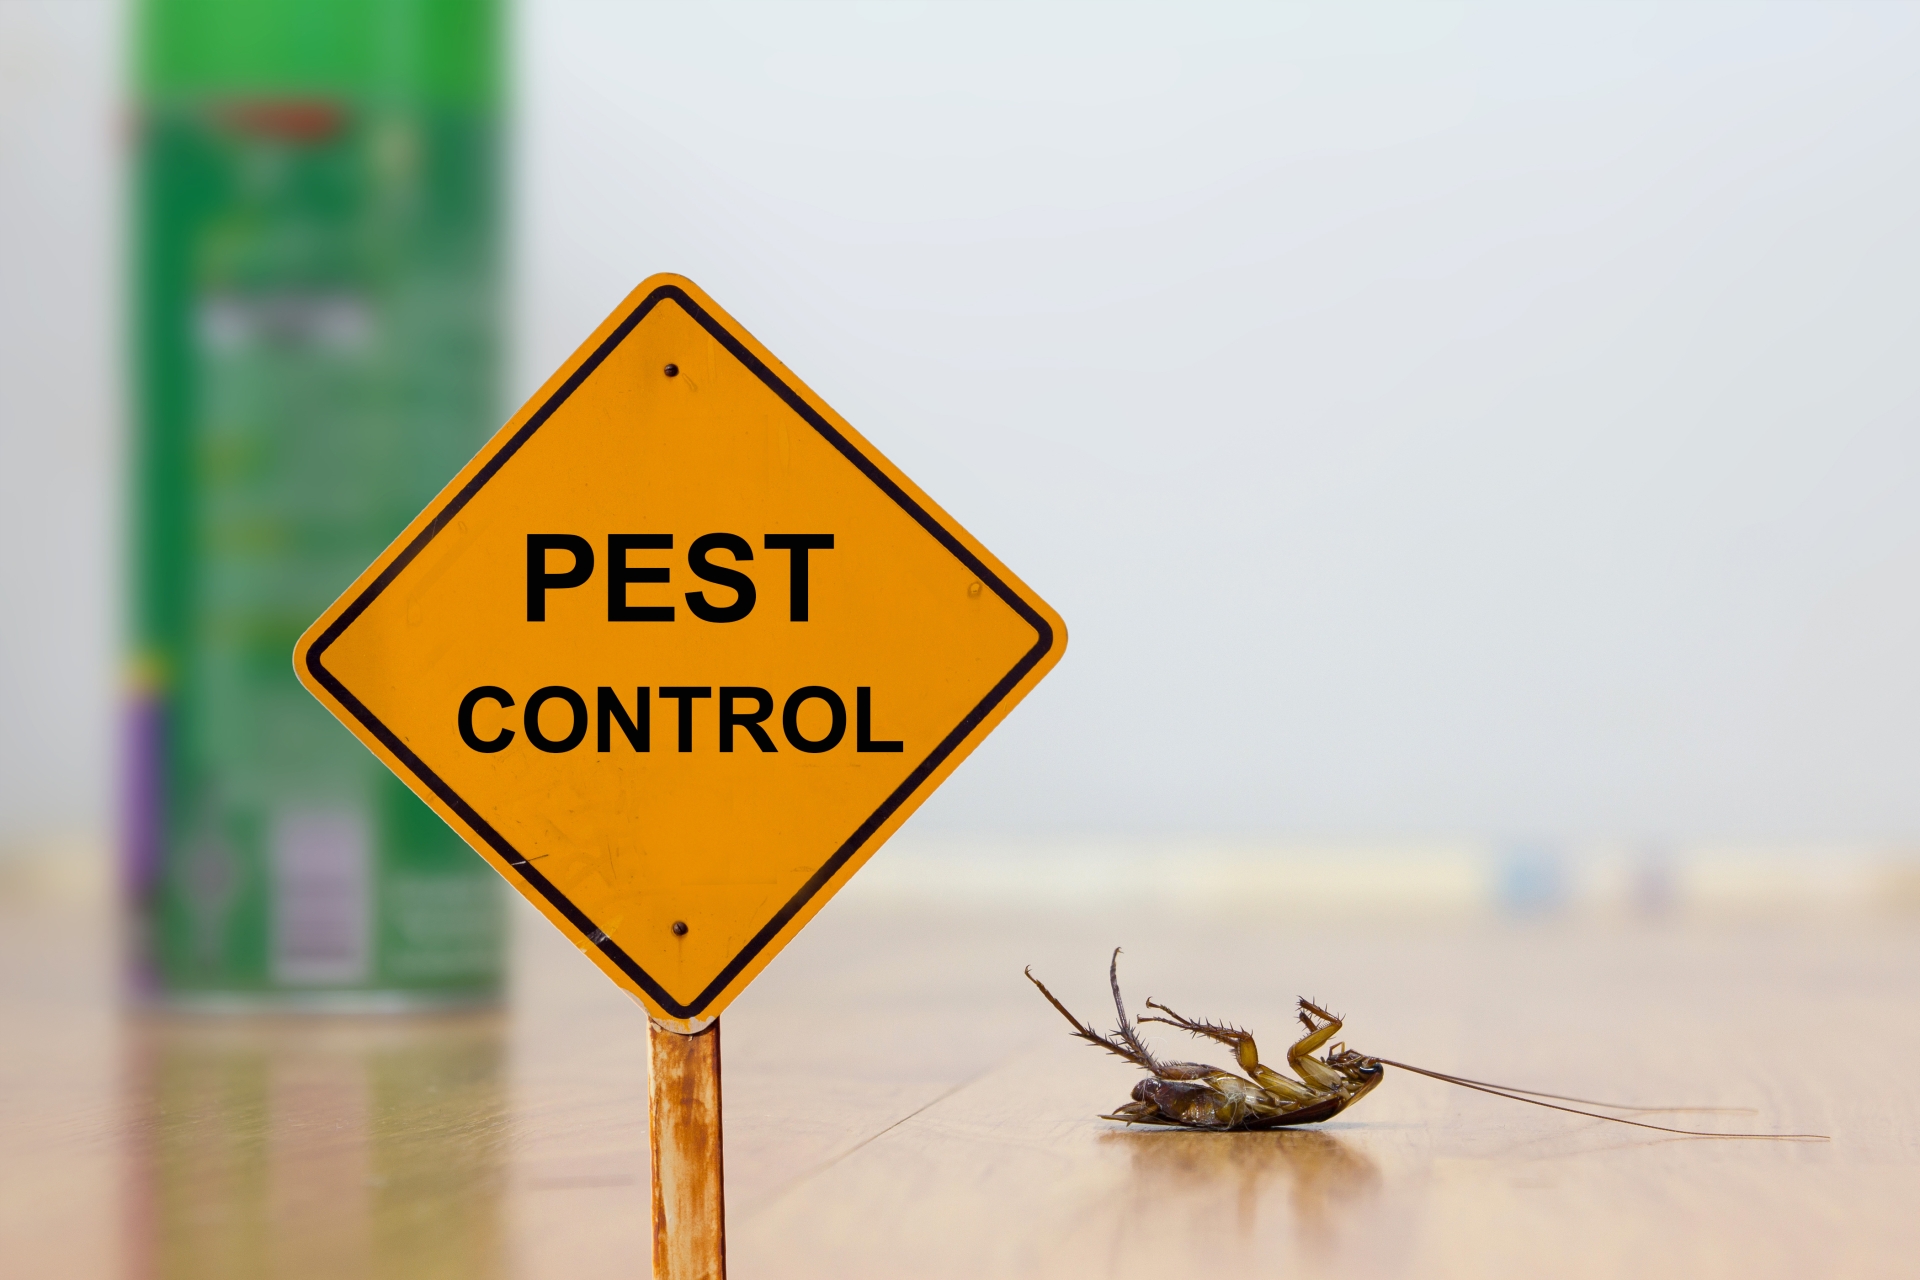 24 Hour Pest Control, Pest Control in Purfleet, RM19. Call Now 020 8166 9746